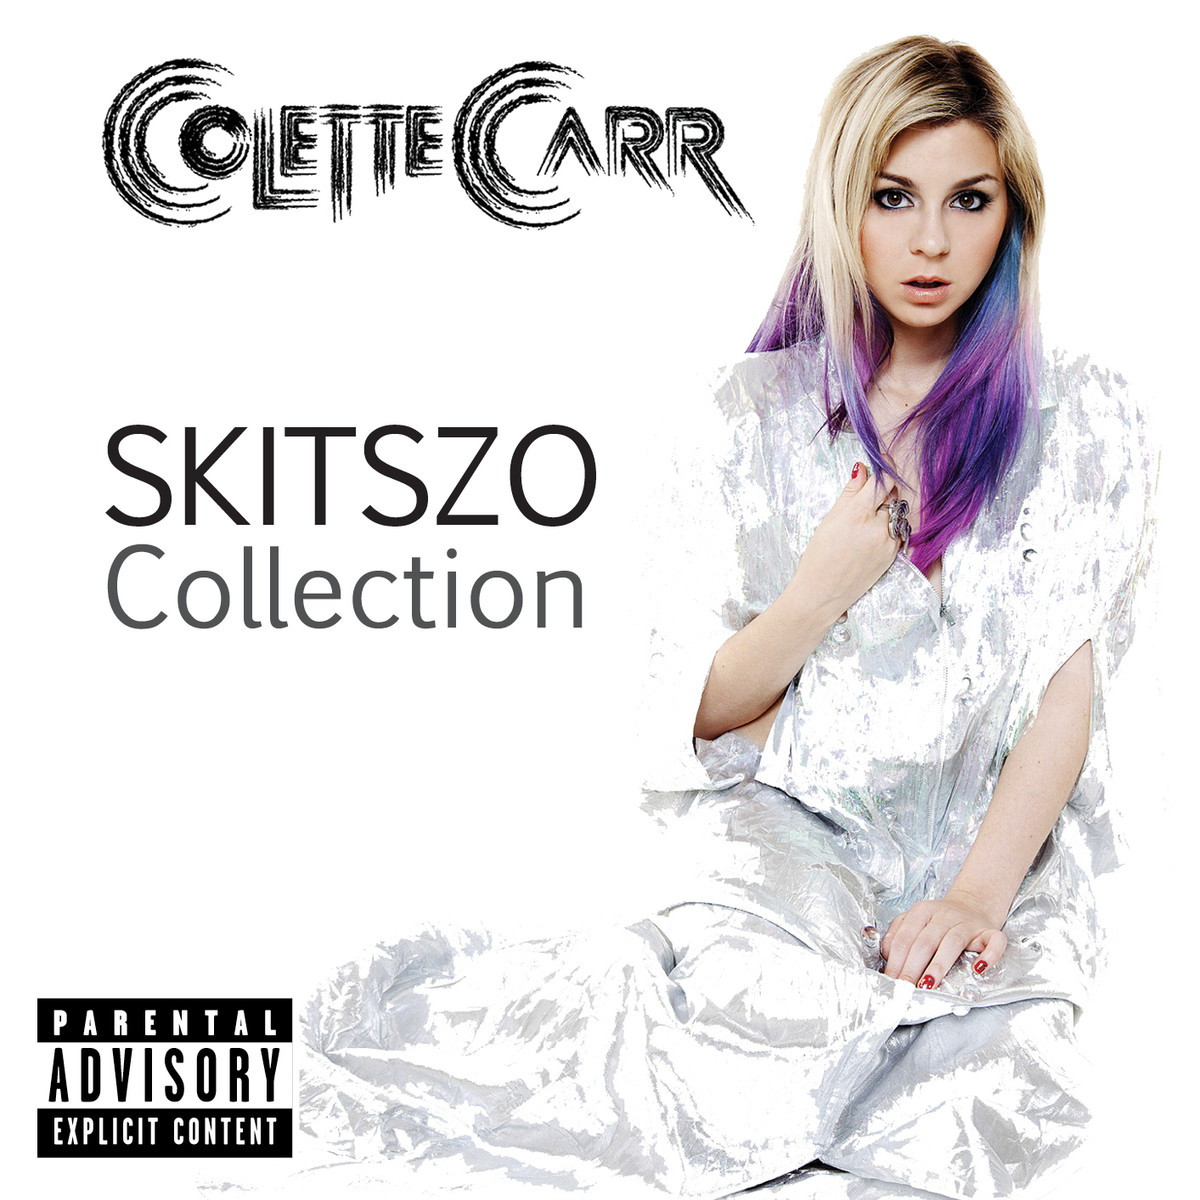 News Added Apr 05, 2013 Skitszo is the upcoming debut studio album by American singer-rapper Colette Carr, which will be released on July 9, 2013 through Interscope. The album will be released in four digital EPs, each featuring four songs. The full album will include all the songs from the EPs, plus four new ones.[1] […]